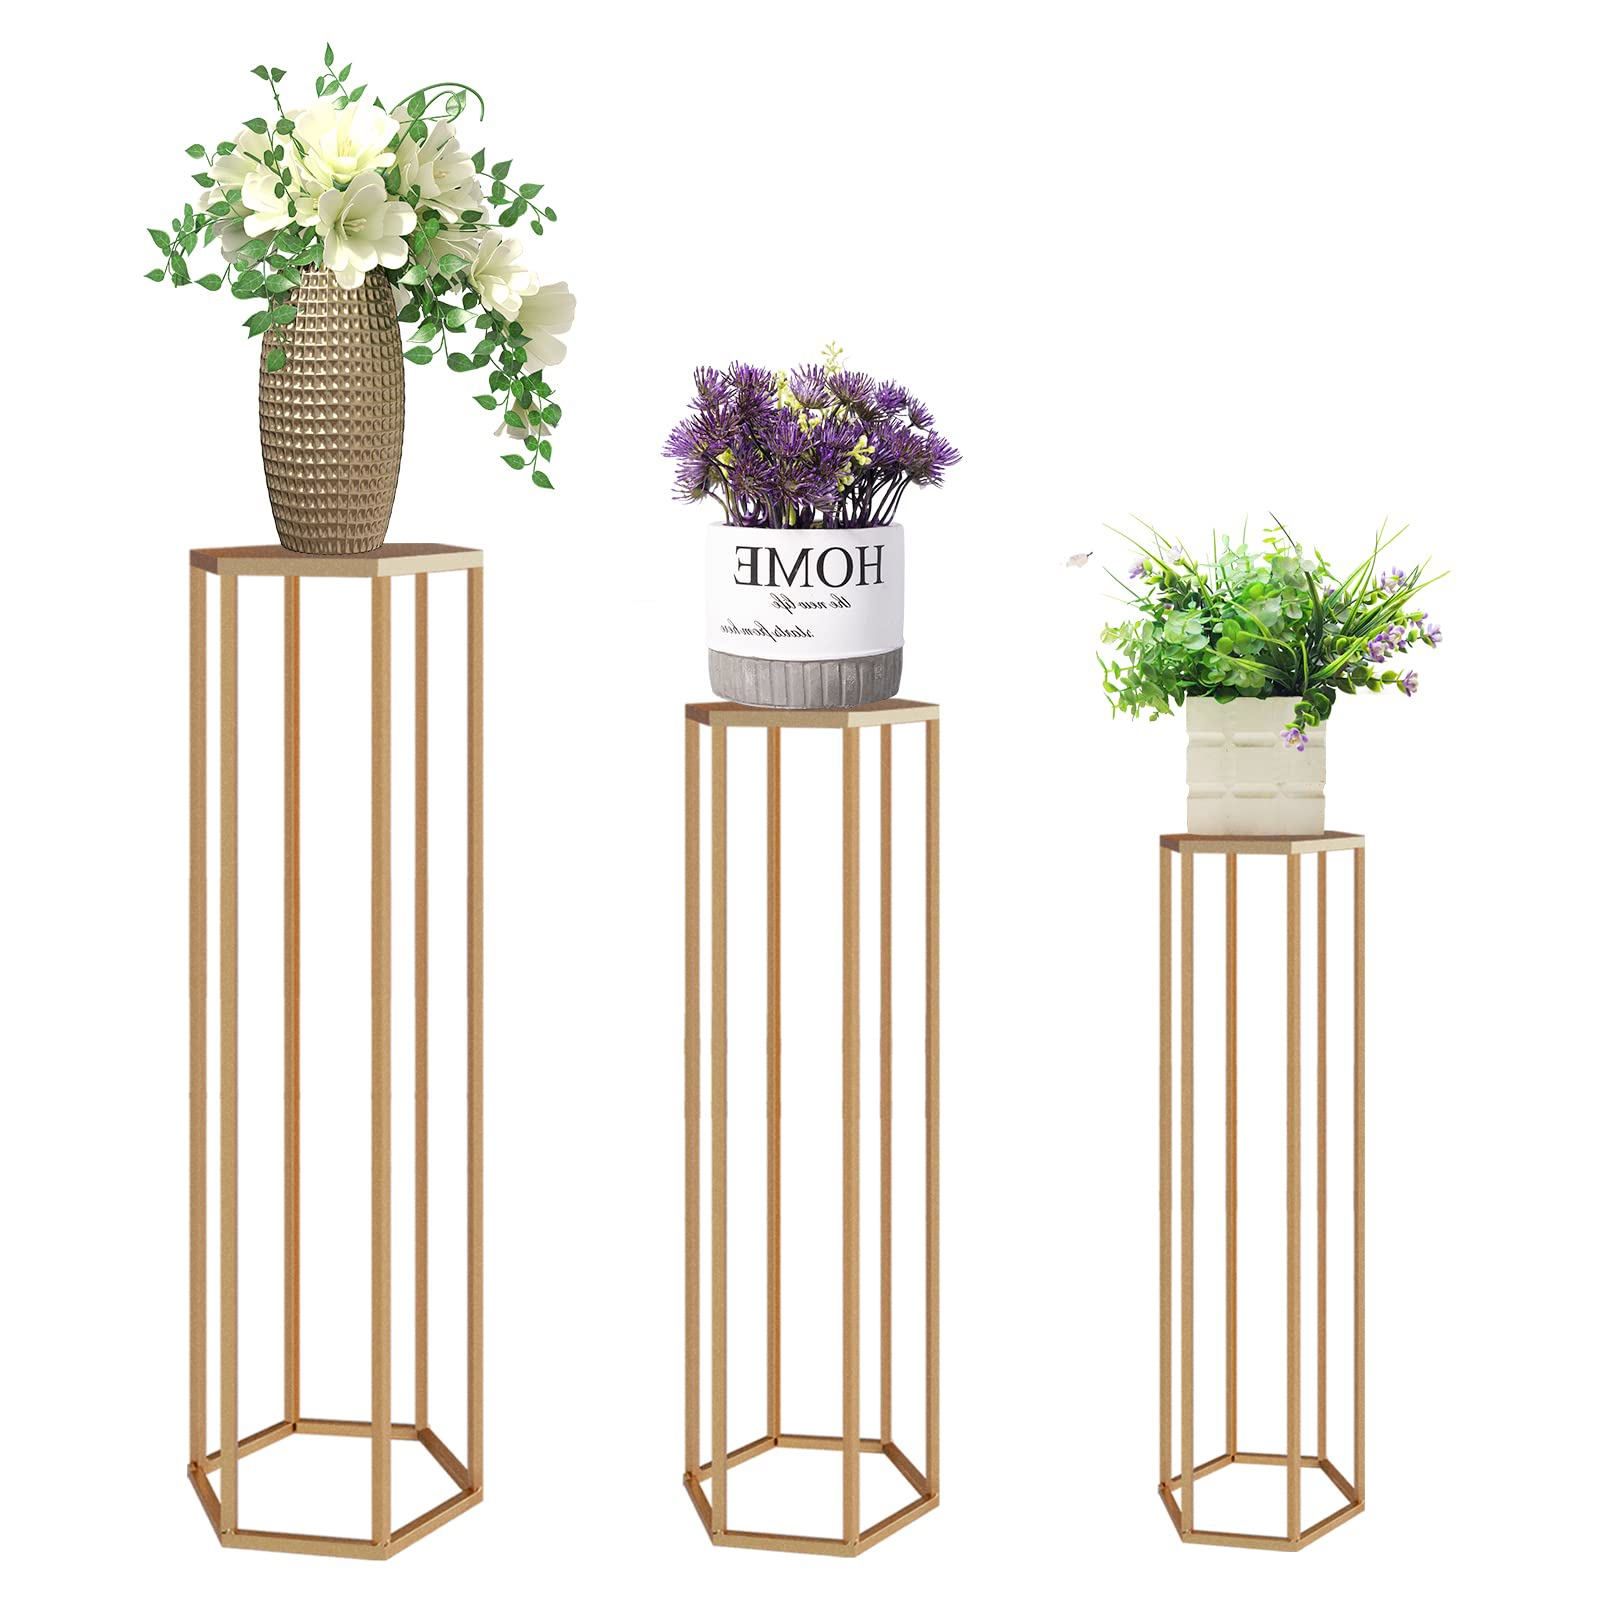 Mxfurhawa Plant Stand Set Of 3 Hexagon Metal Plant Shelf For Indoor And  Outdoor, Gold – Walmart Regarding Most Recent Set Of 3 Plant Stands (View 15 of 15)